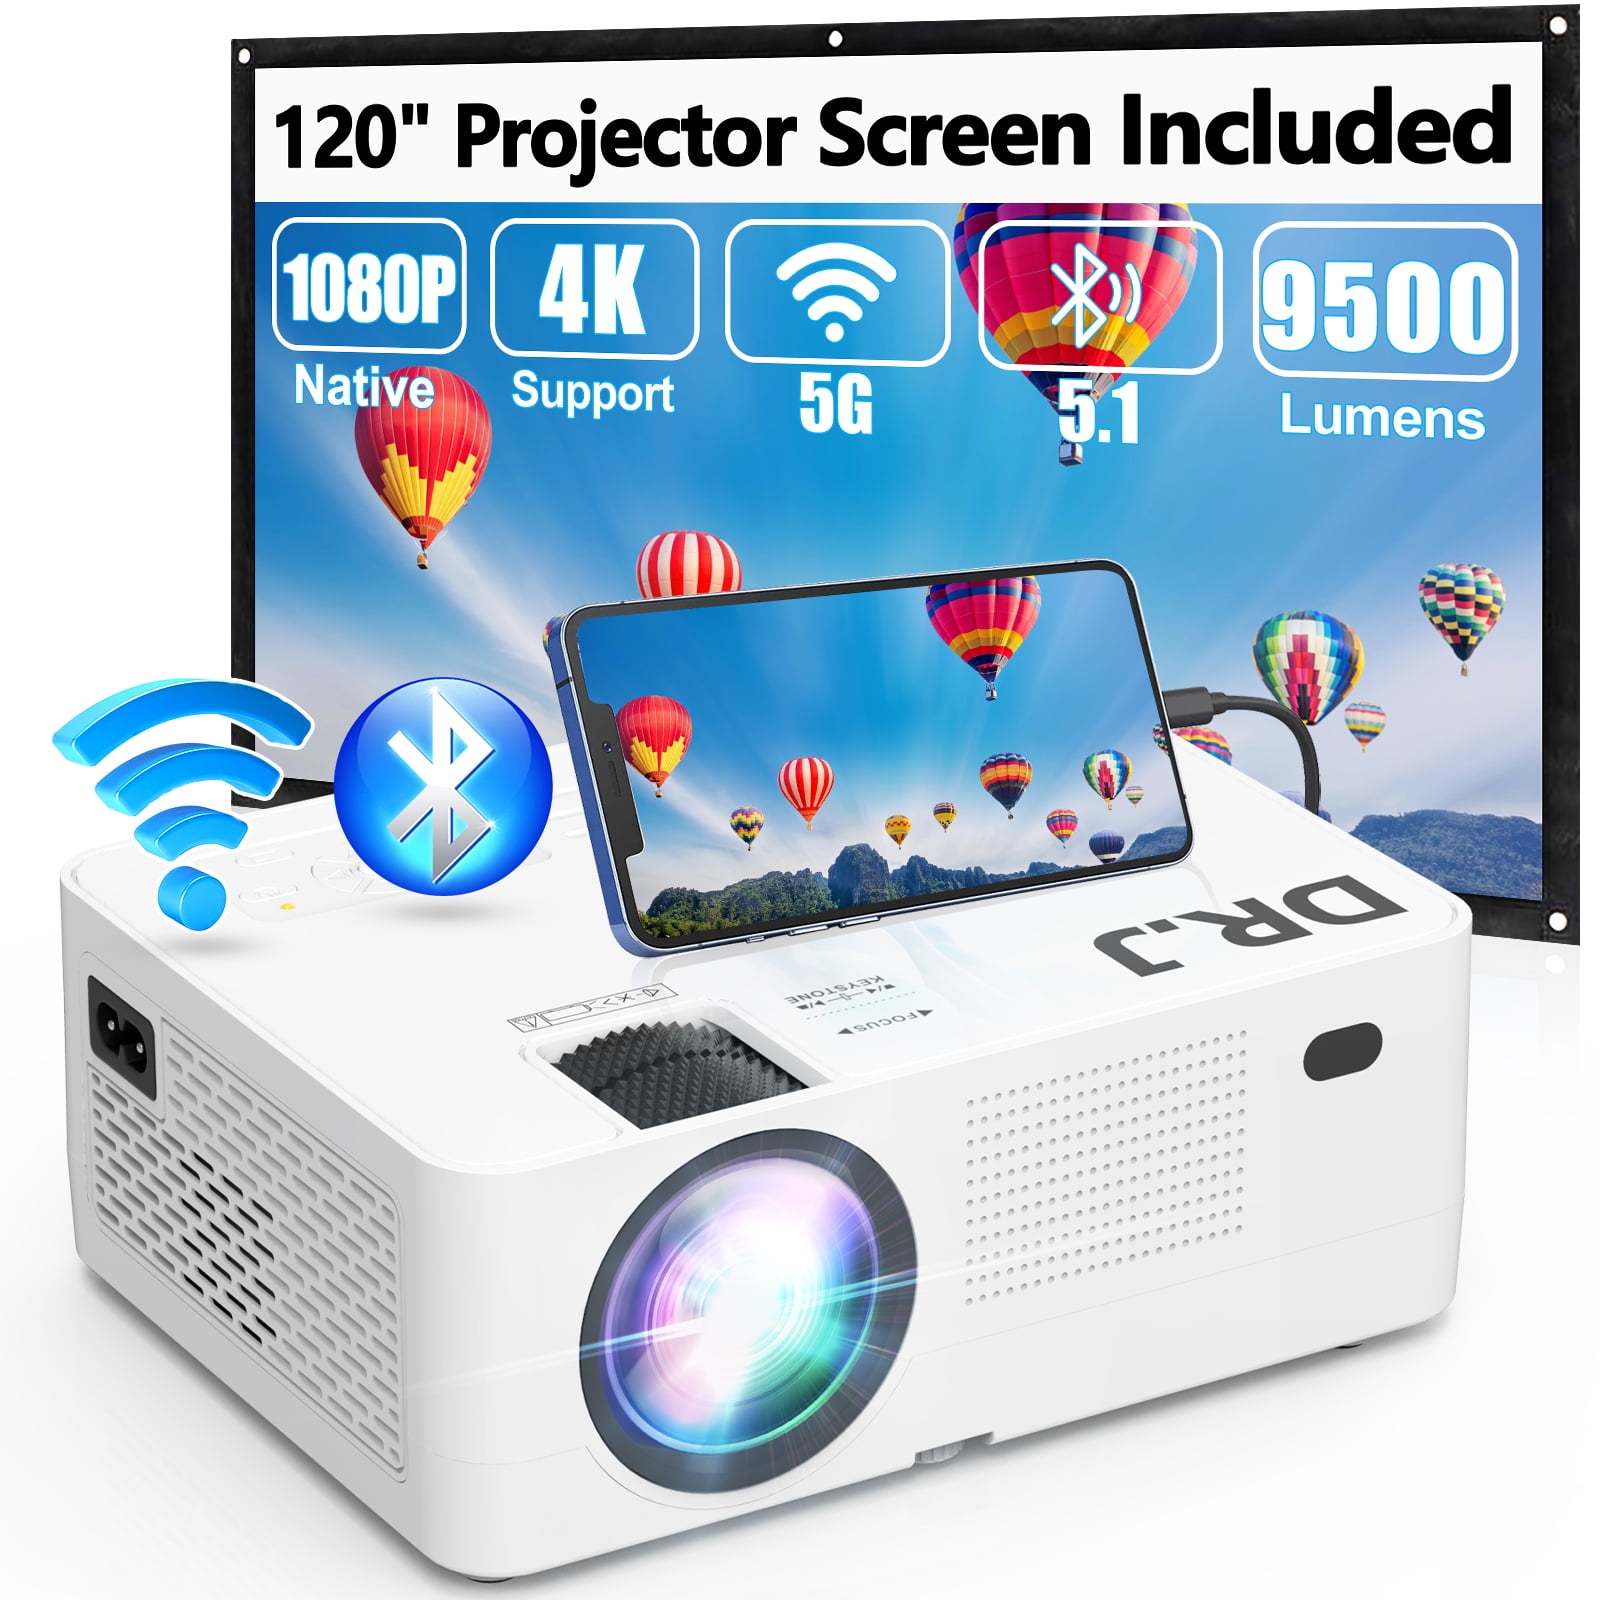 DR.J Professional Native 1080P 5G Wifi 250 Display Projector with  Bluetooth 5.1, Full HD 4K 9500Lumens Outdoor Movie Projector, 120 Screen  Included 